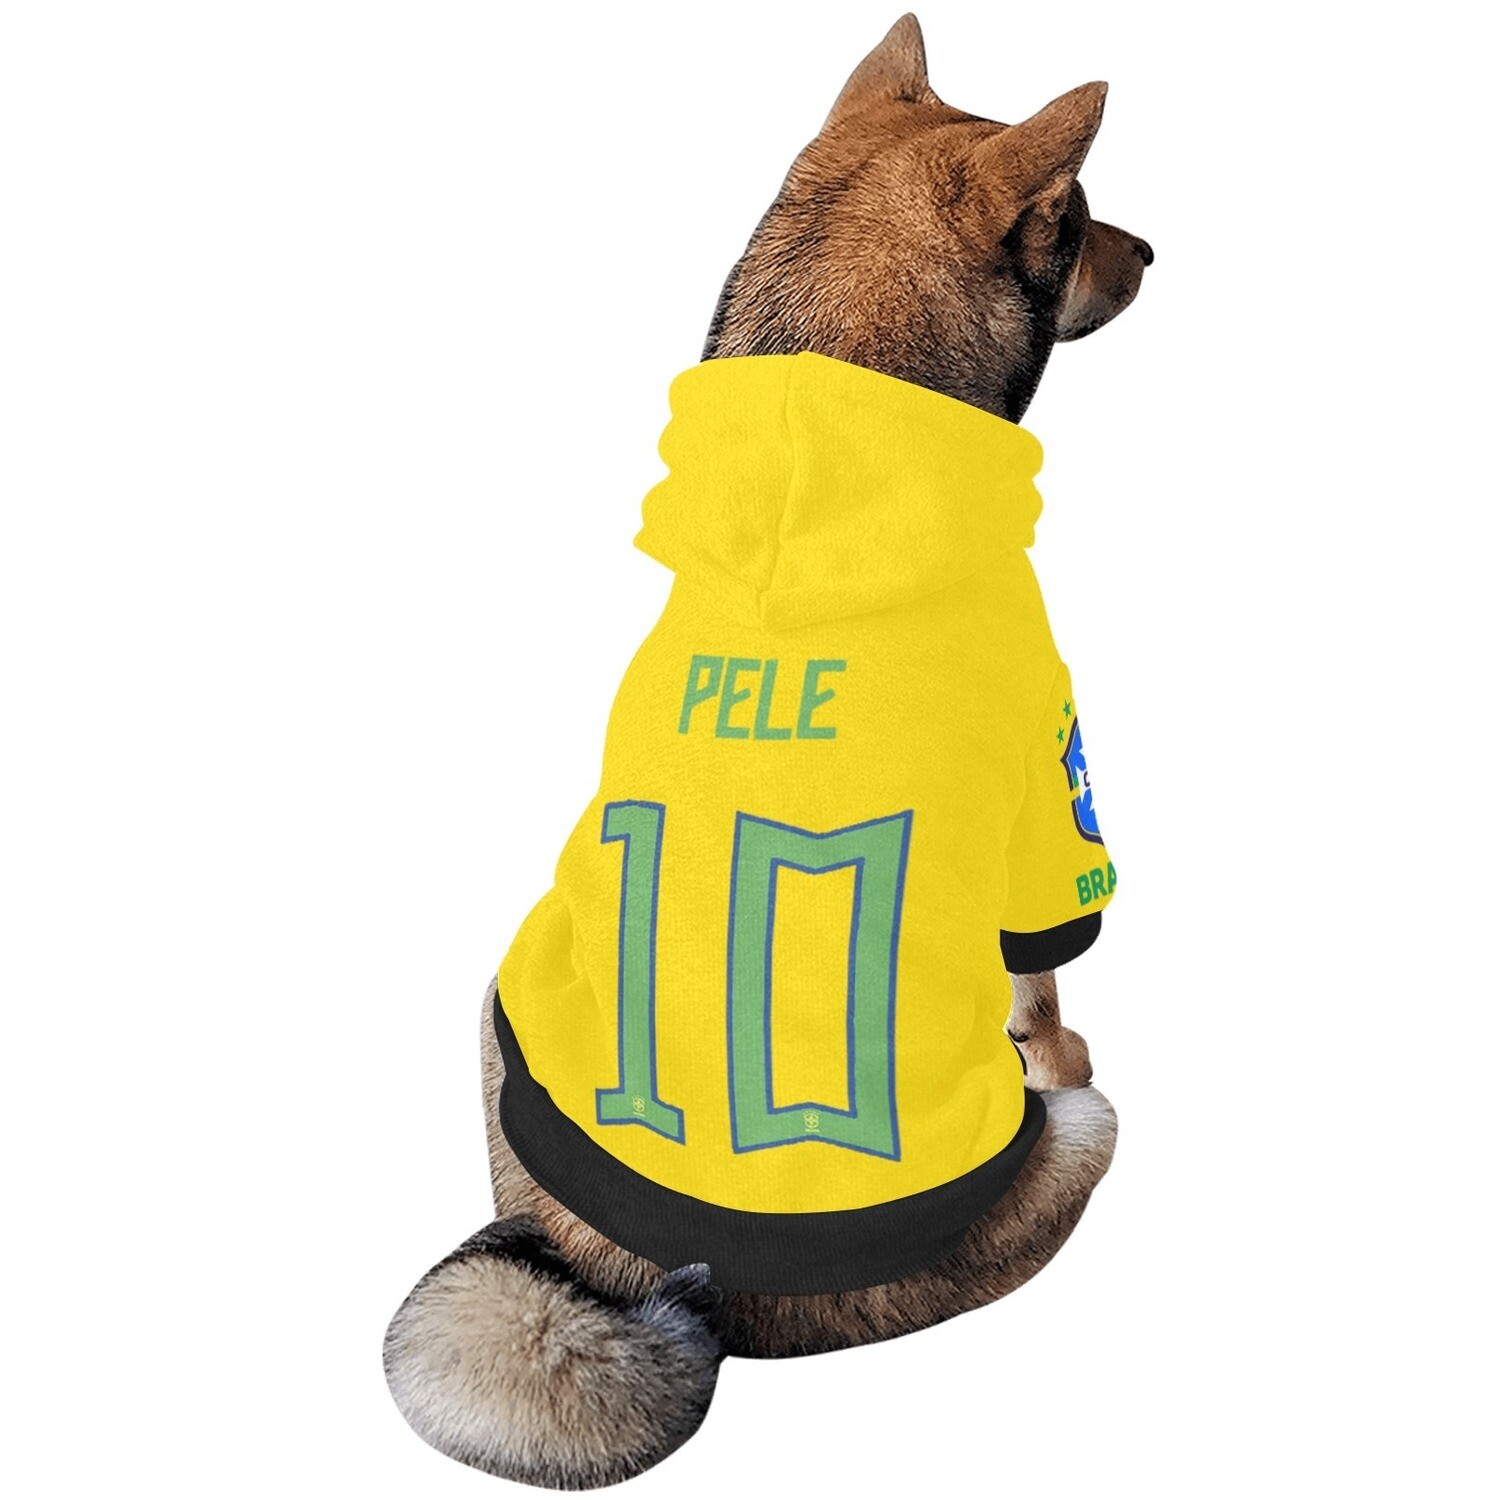 🐕⚽️ 🇧🇷 Dog hoodie Brazil Soccer Team, Pelé, 10, fuzzy warm buttoned dog hooded sweatshirt, dog hooded sweater, Dog clothes, Dog clothing, Dog apparel, Gift for dogs, Halloween